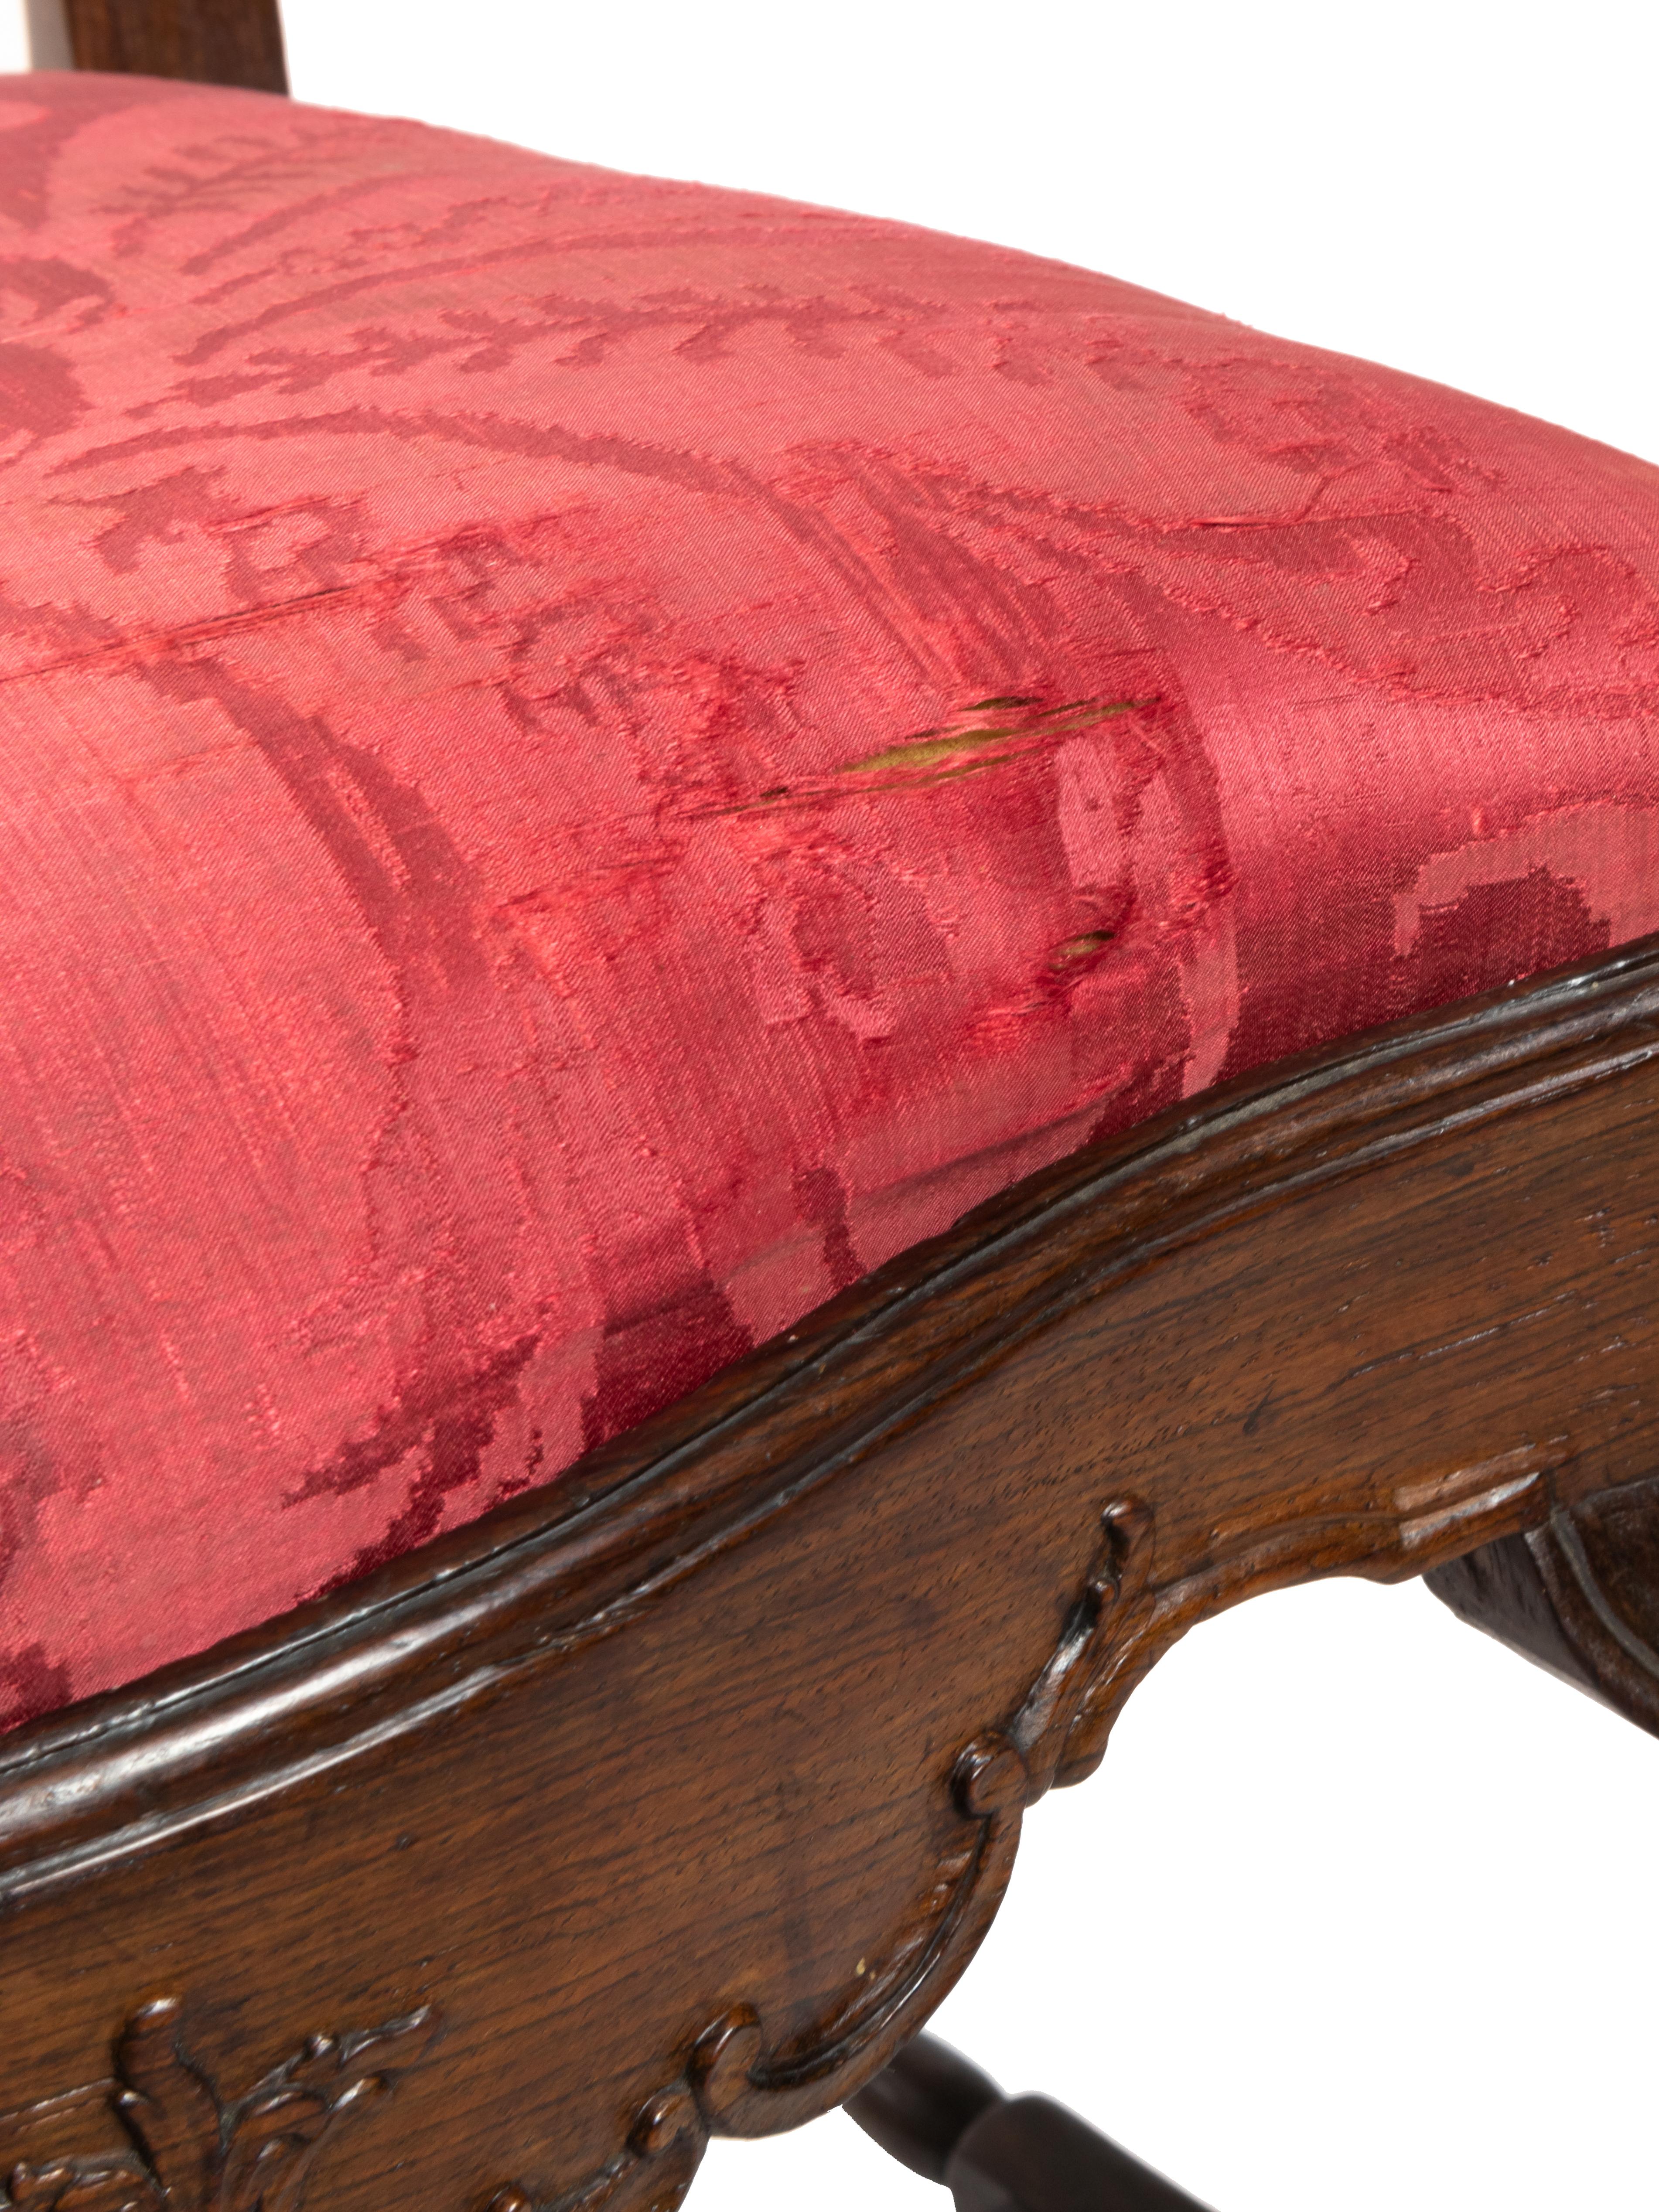 Baroque Red Damask Portuguese Chair, 18th Century For Sale 10